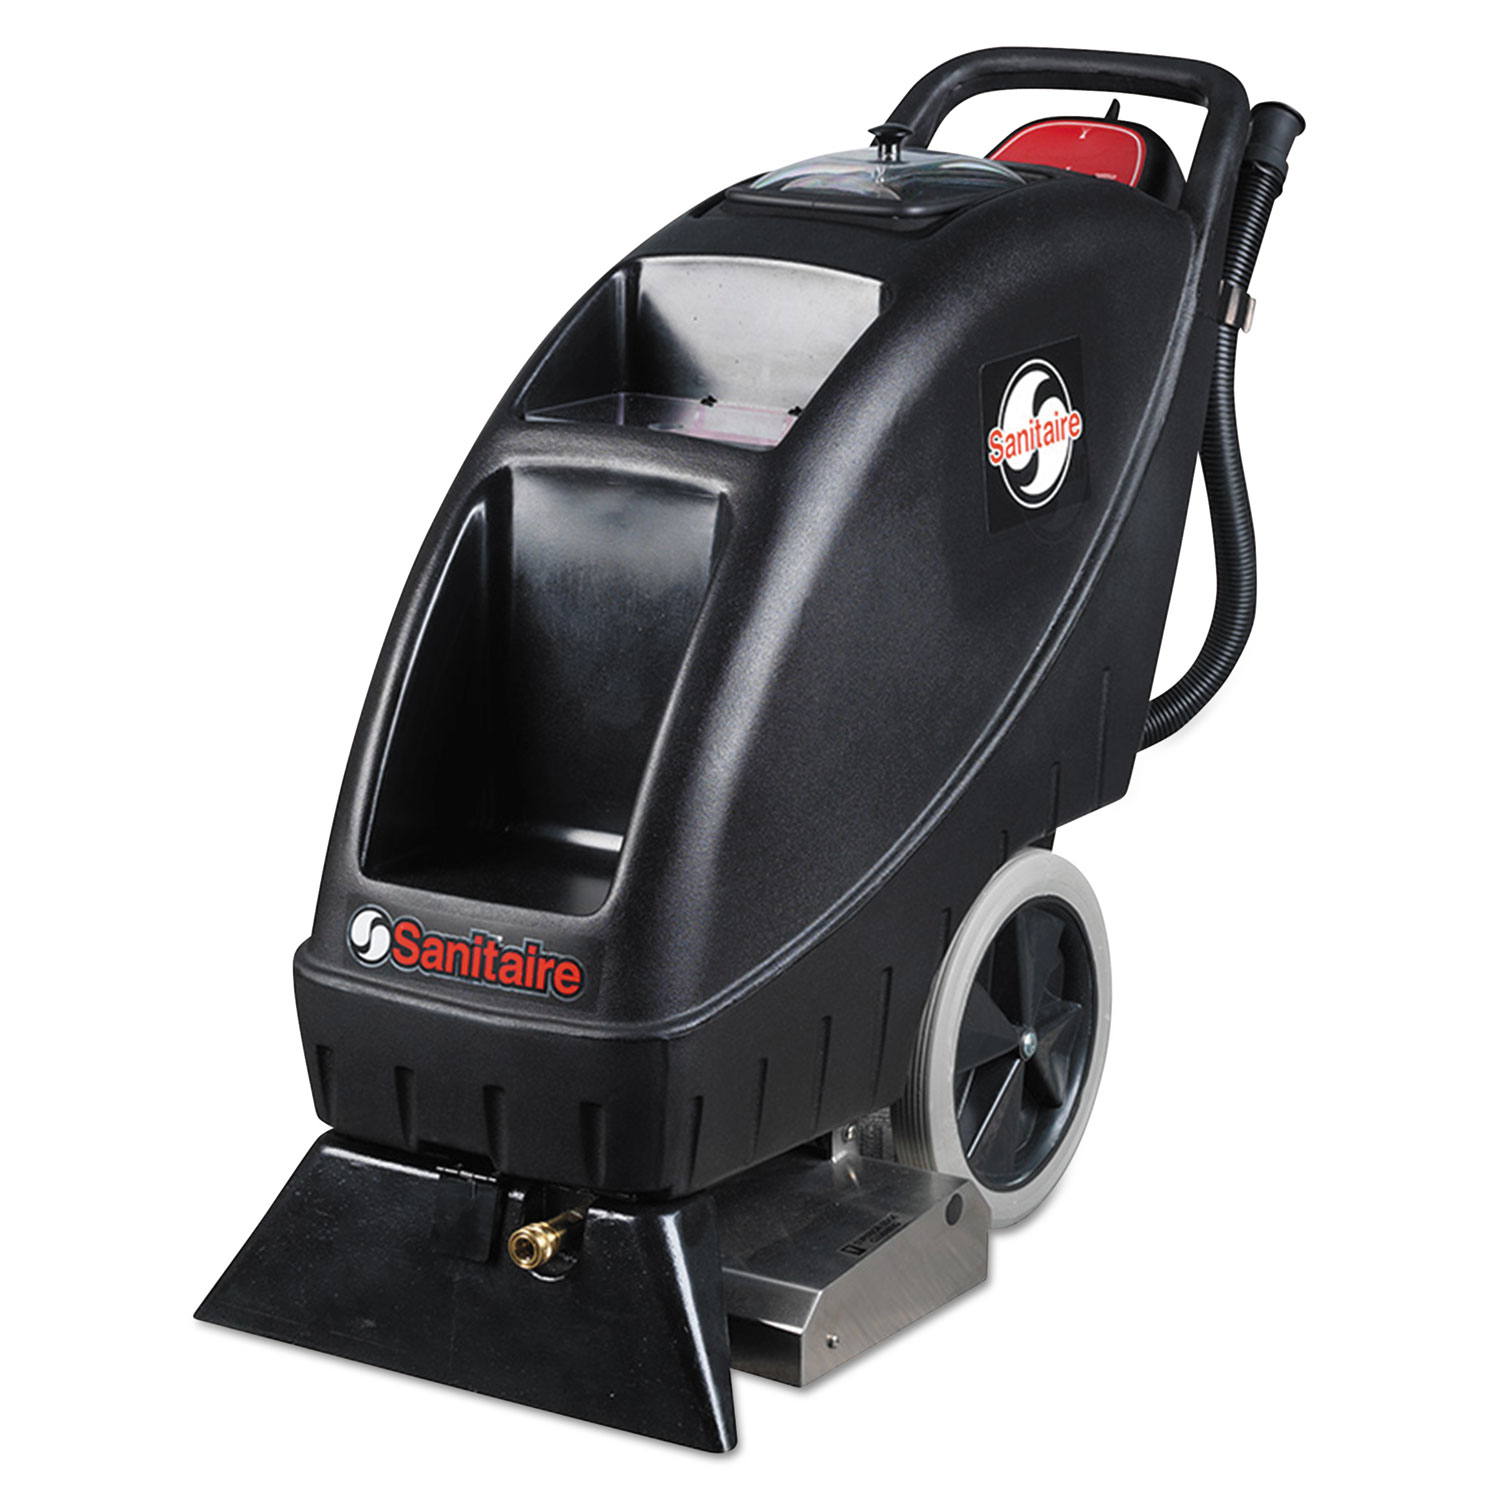 Model SC6095 Upright Carpet Cleaner, 9 gal Recovery Tank, 100 psi, Black